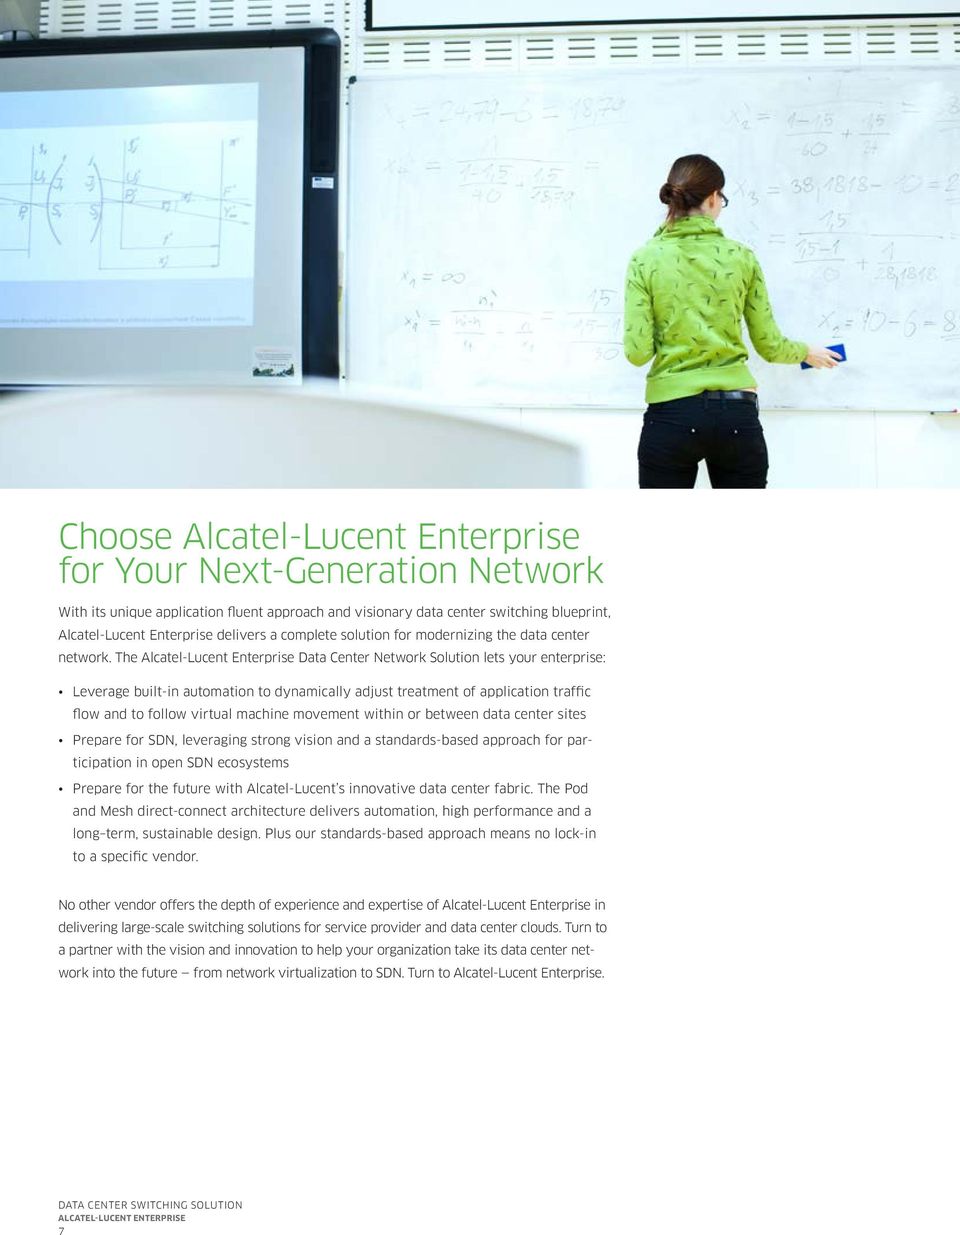 The Alcatel-Lucent Enterprise Data Center Network Solution lets your enterprise: Leverage built-in automation to dynamically adjust treatment of application traffic flow and to follow virtual machine